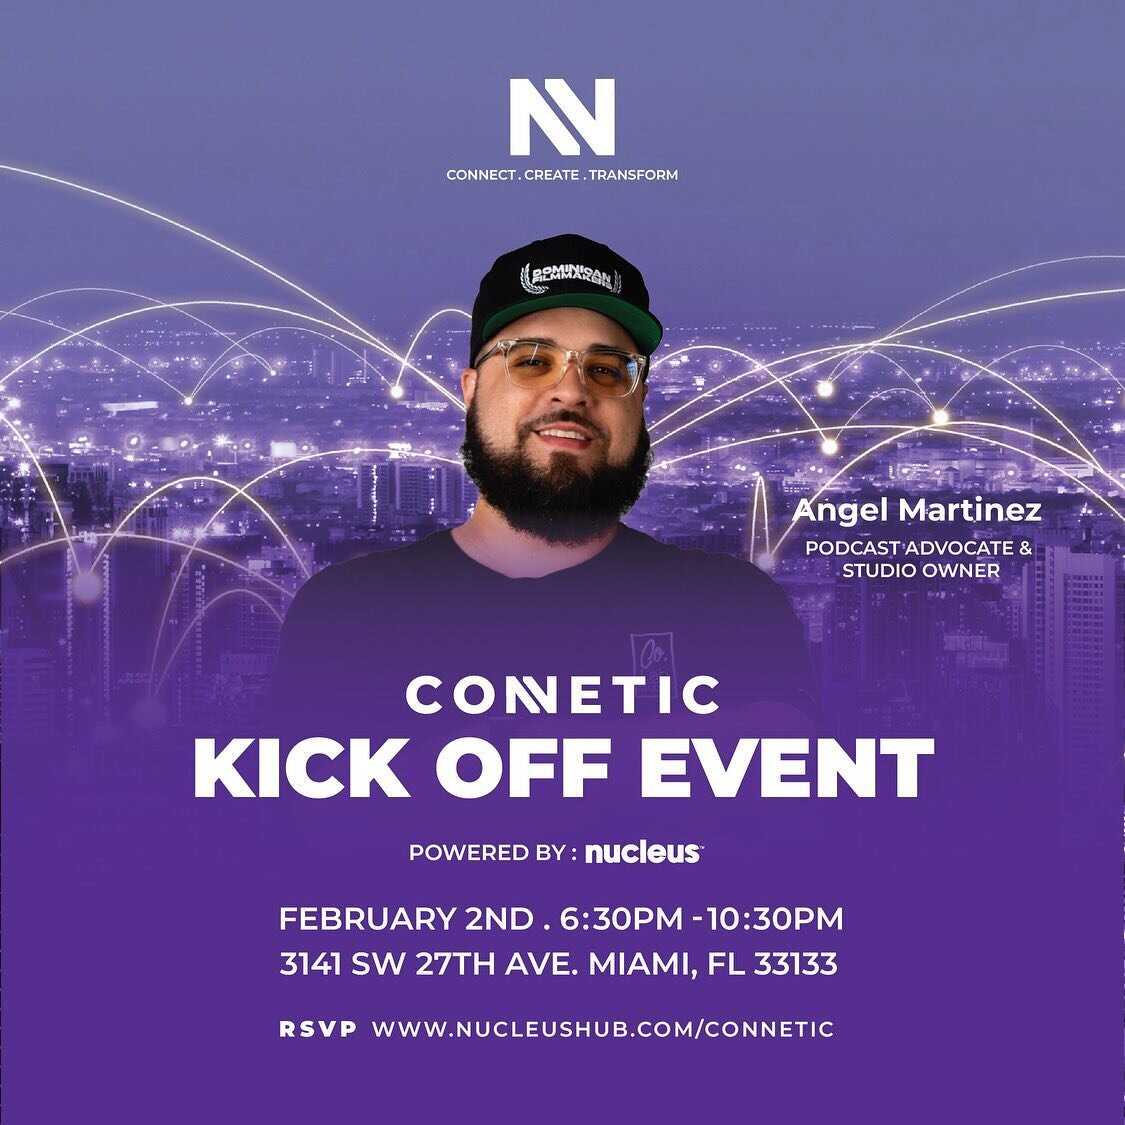 I would love to meet y&rsquo;all in person. RSVP to the @nucleus.hub event on 2/2 from 6:30 PM-10:30 PM 3141 SW 27th AVE., Miami FL are you able to make it out!? Links will be in the bio.